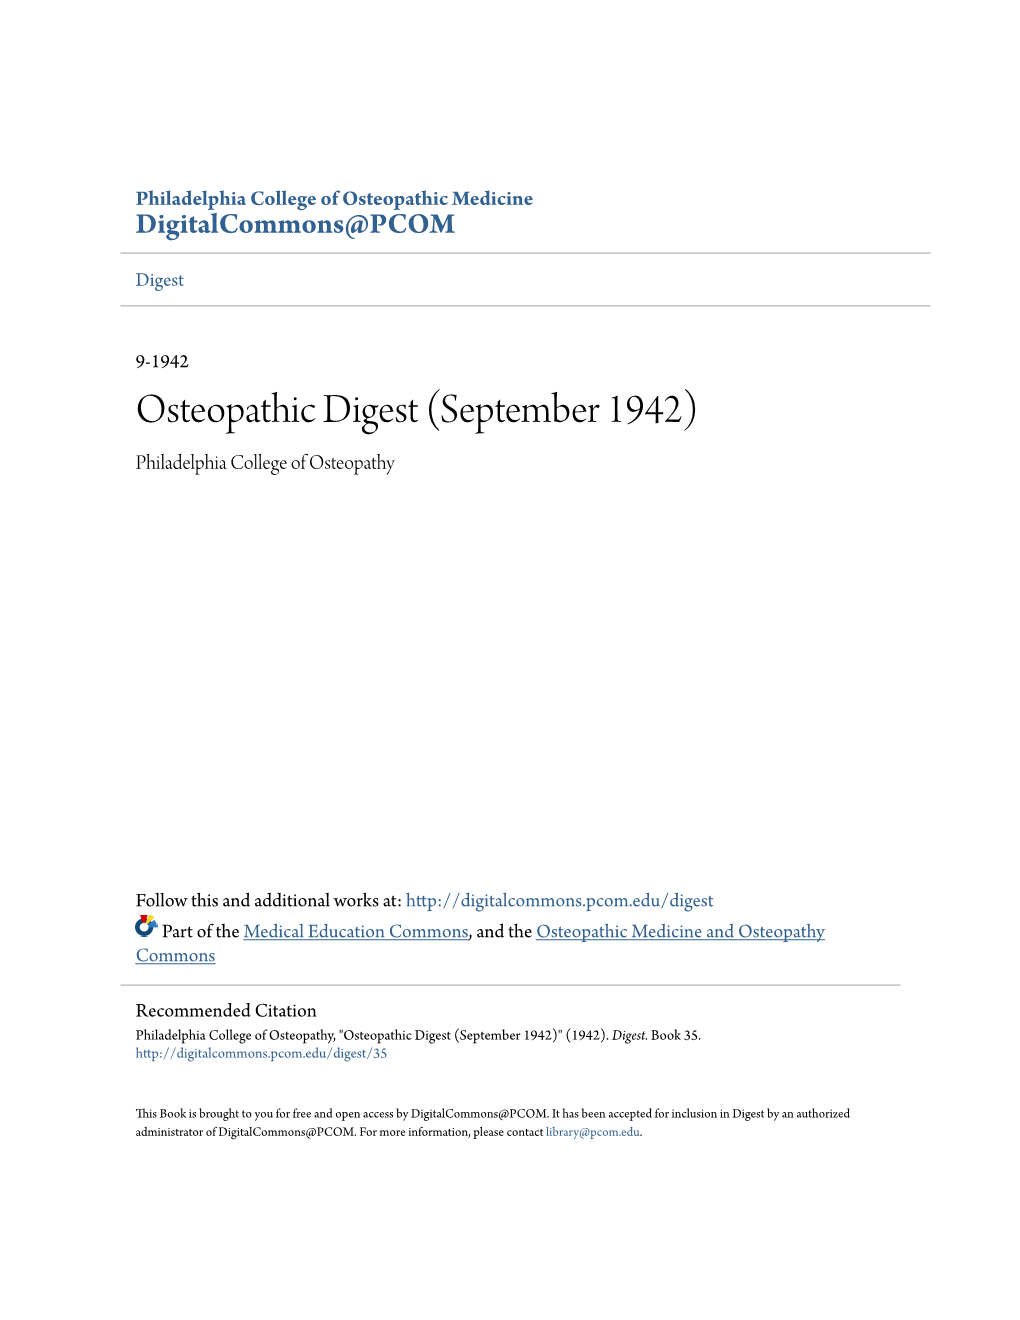 Osteopathic Digest (September 1942) Philadelphia College of Osteopathy